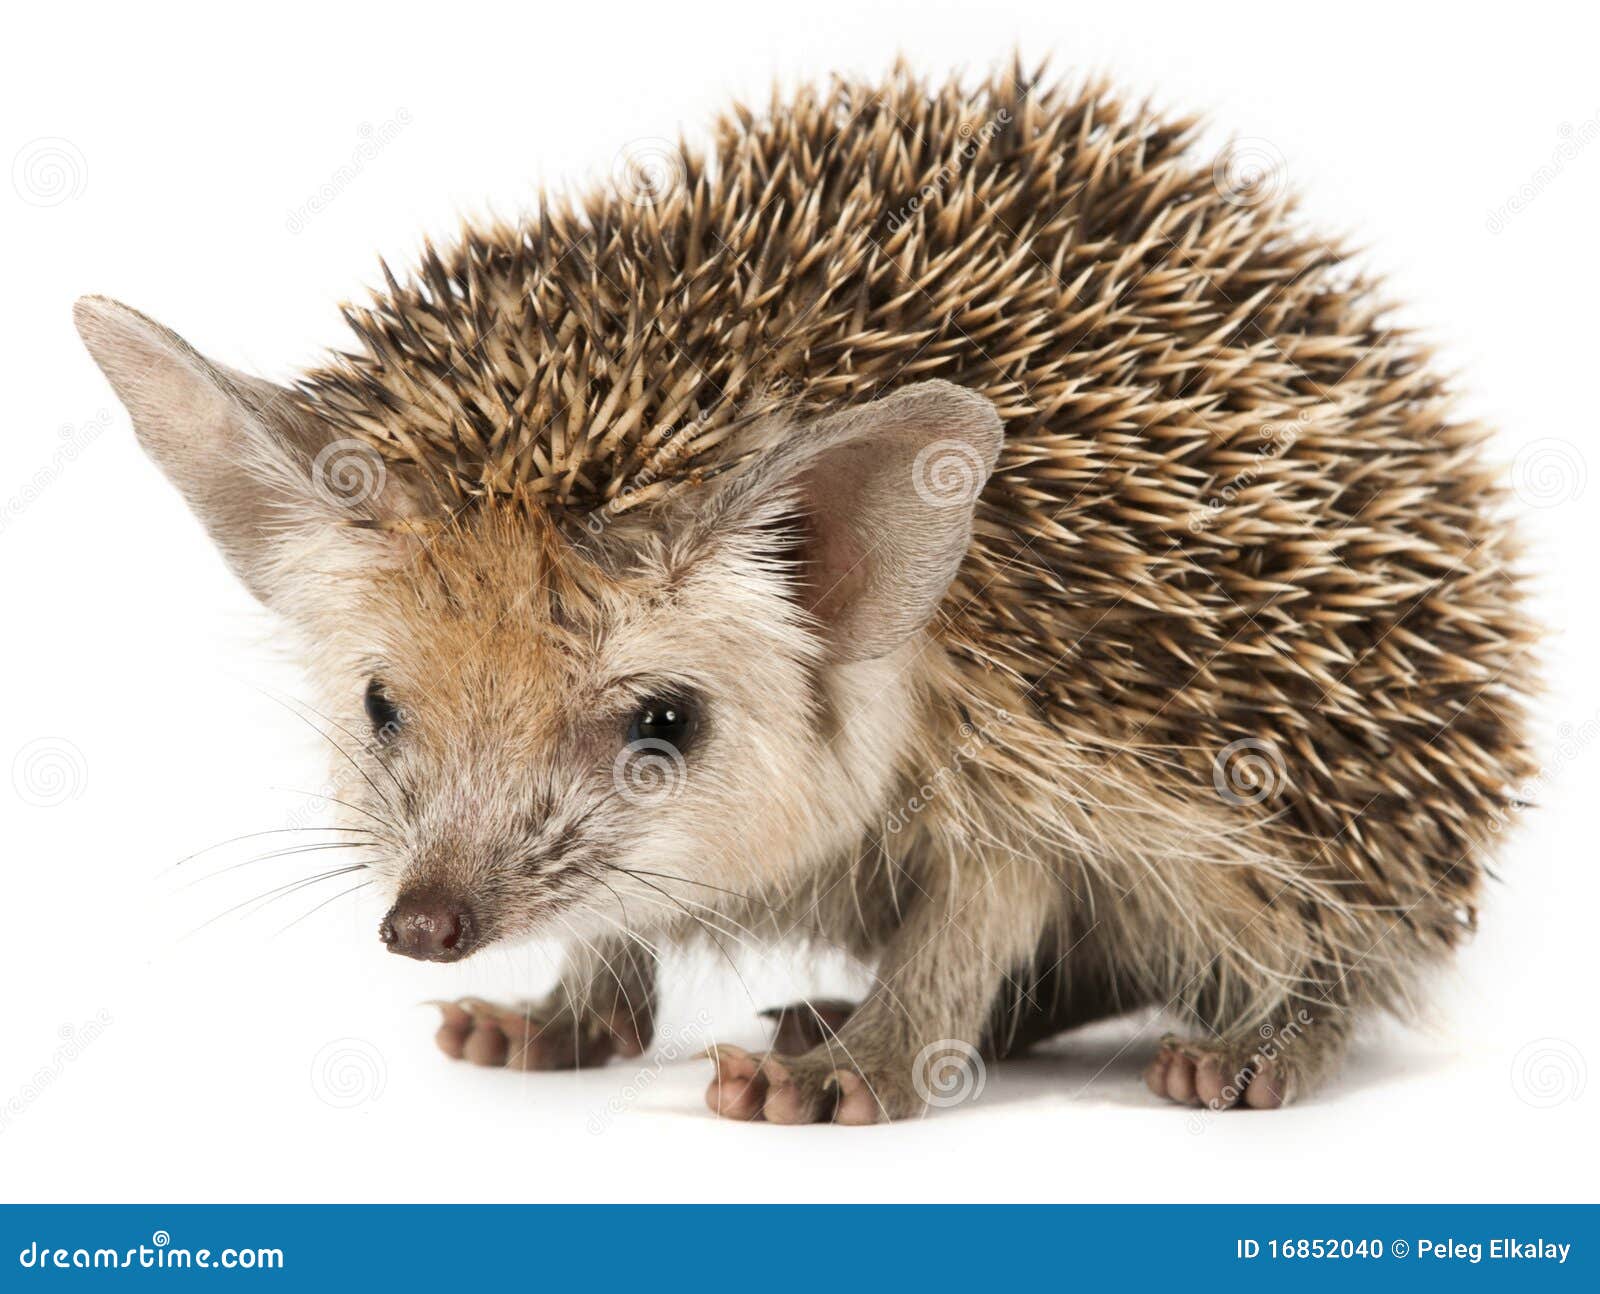 porcupine on a white background